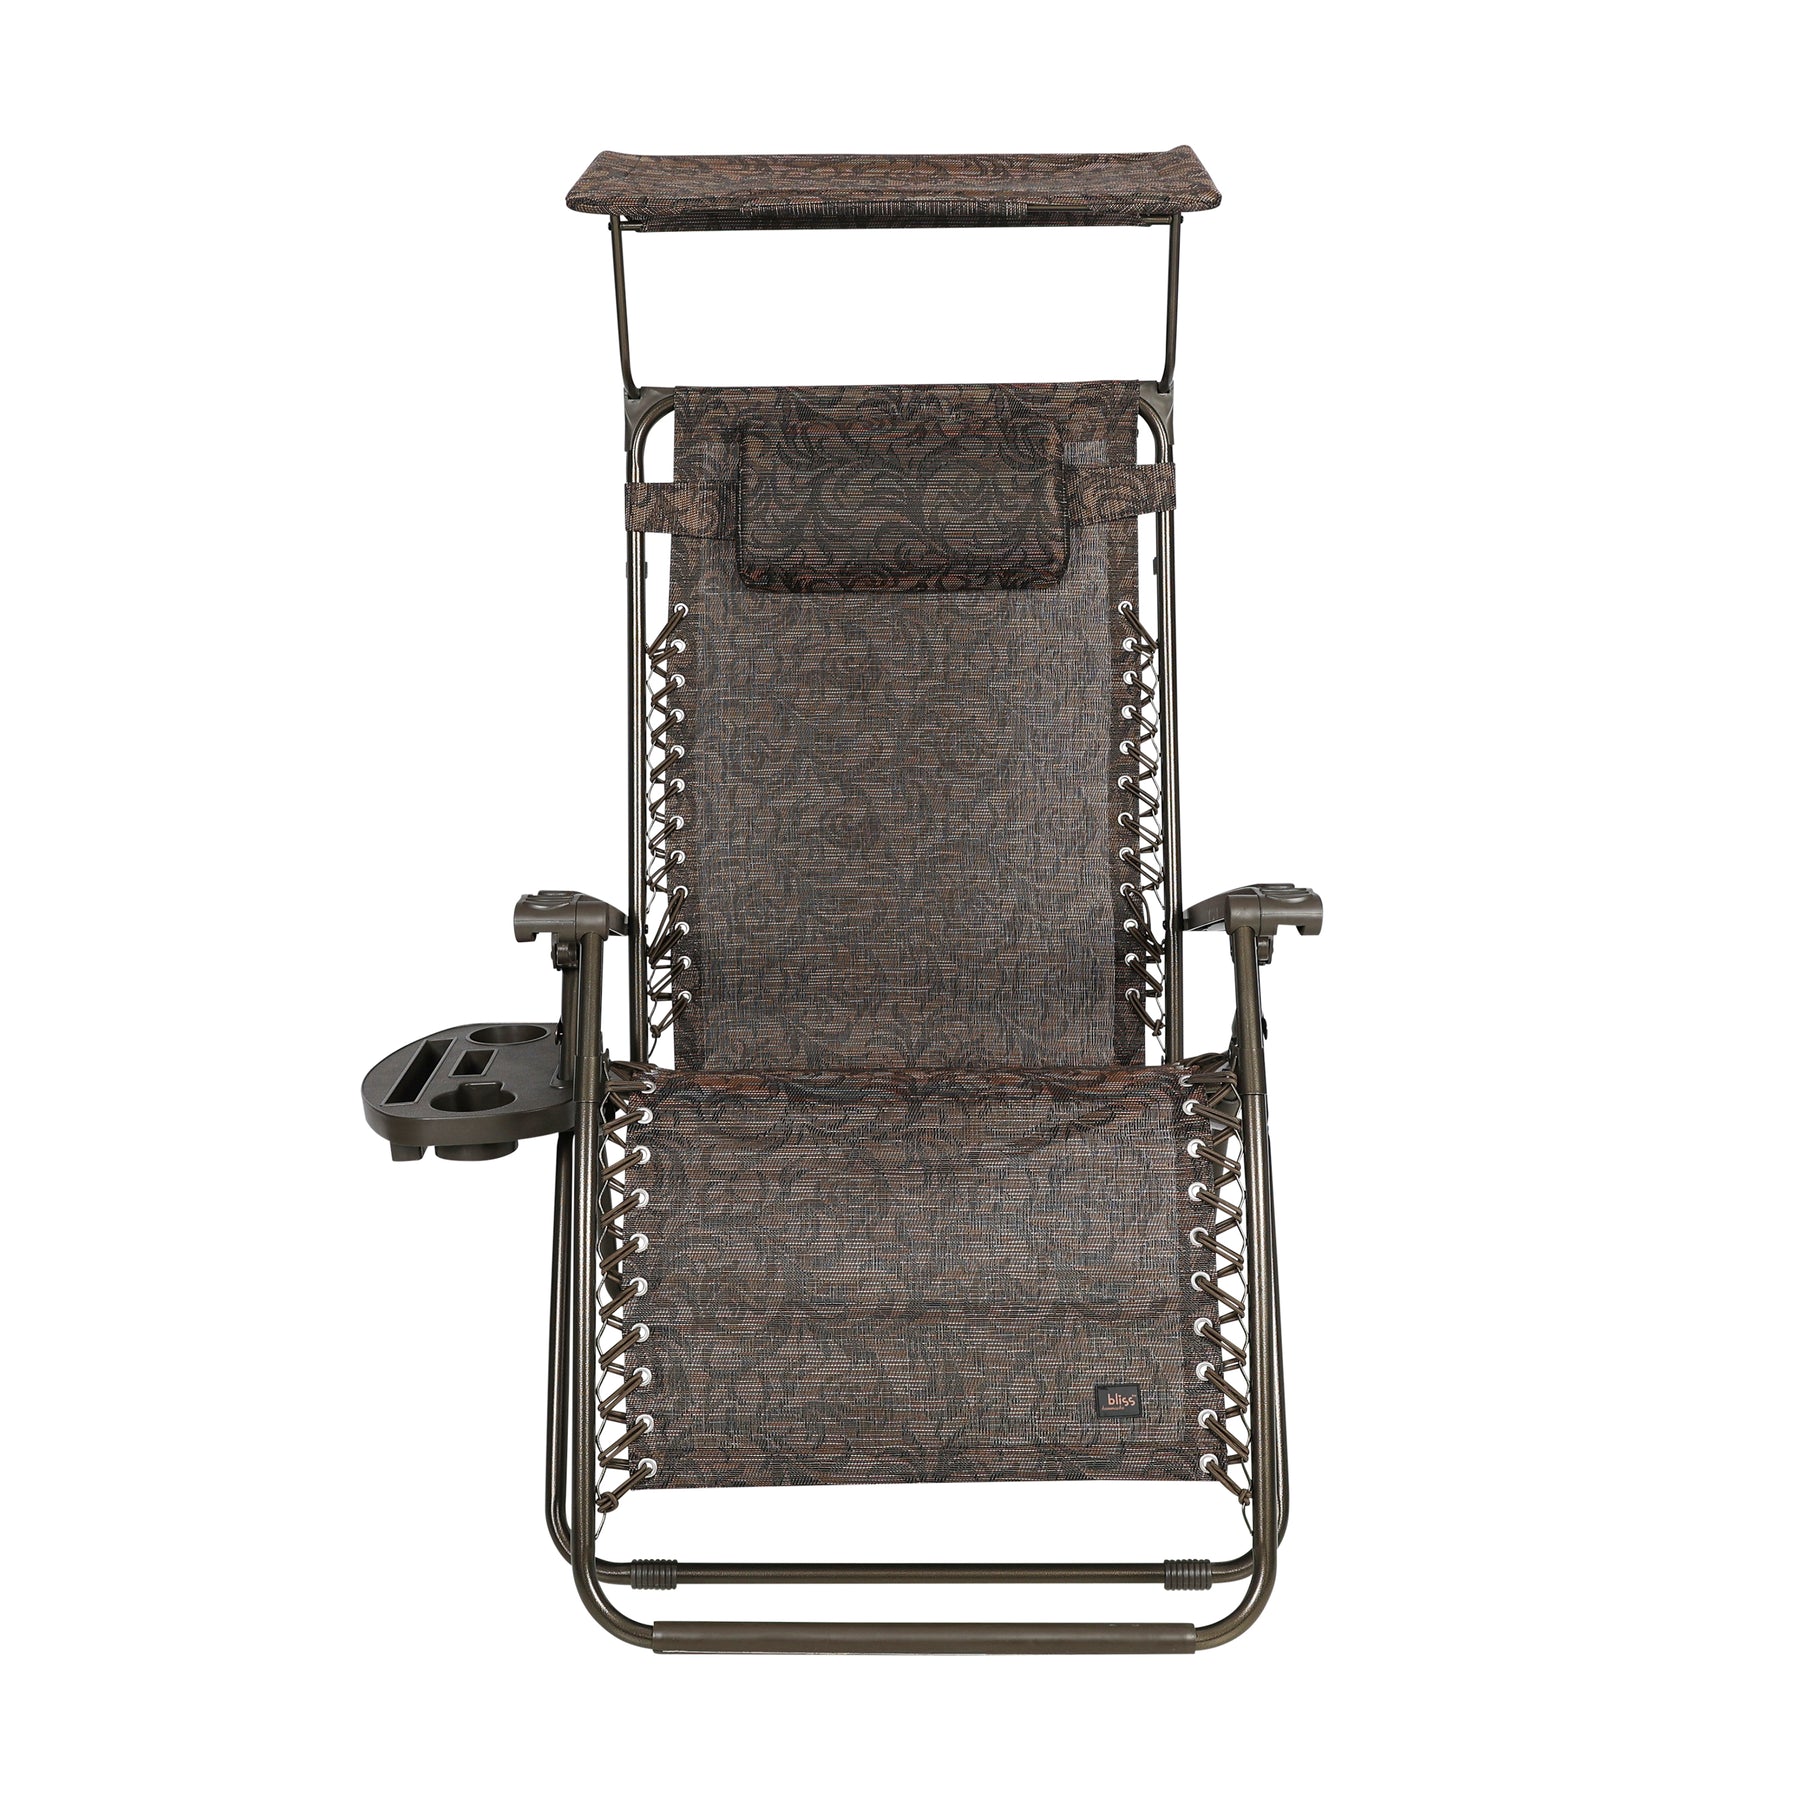 Front view of the Bliss Hammocks 30-inch Wide XL Zero Gravity Chair with Adjustable Canopy Sun-Shade, Drink Tray, and Adjustable Pillow in the brown jacquard variation.